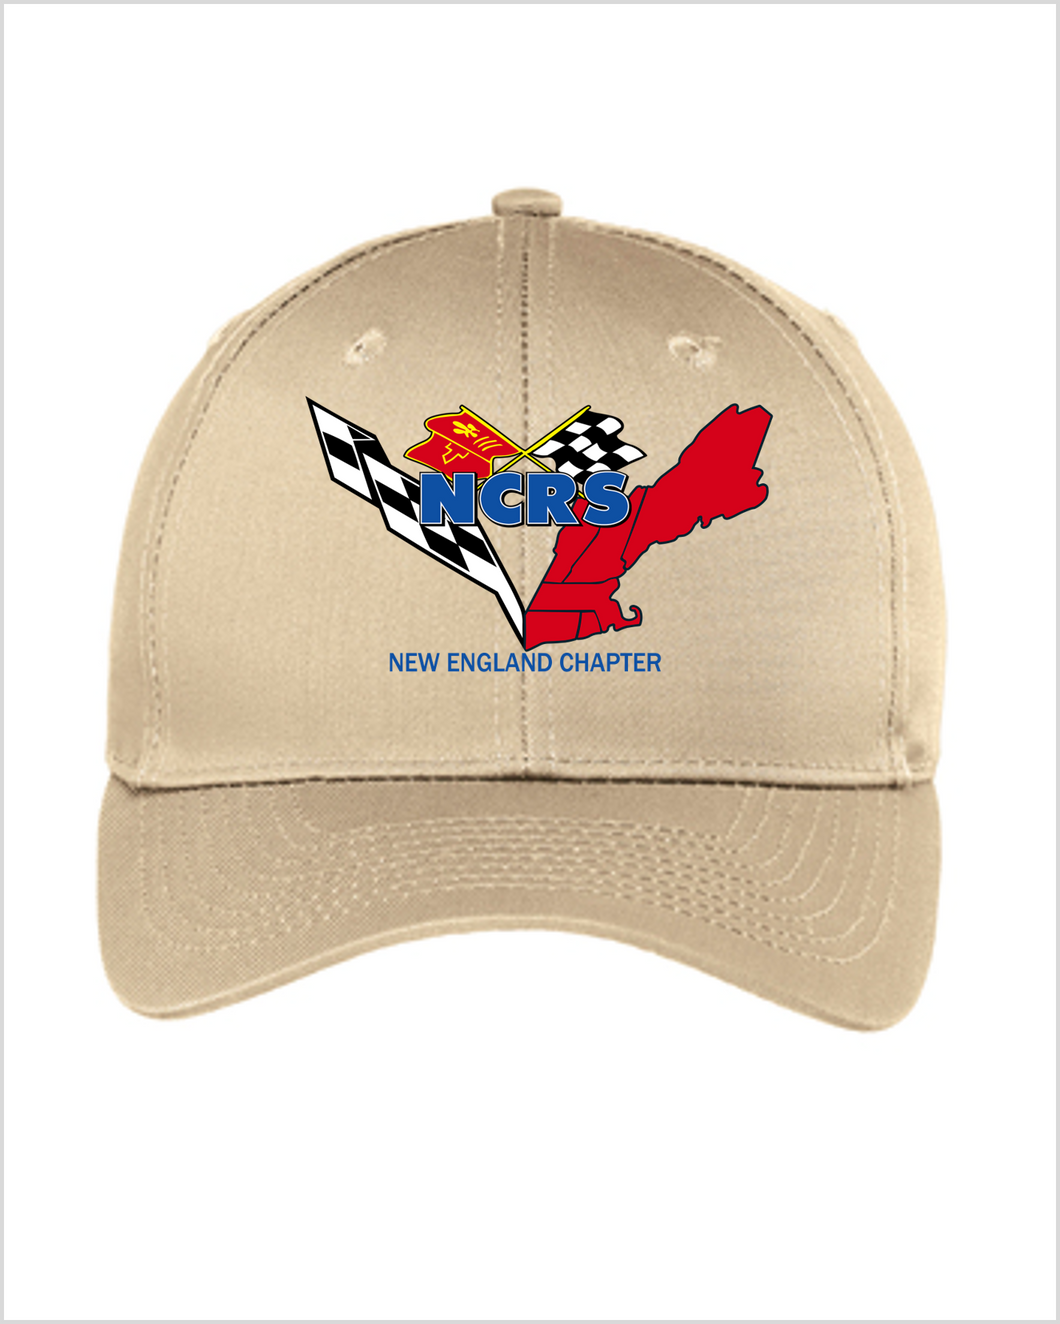 NCRS NEW ENGLAND CHAPTER Adjustable Cap